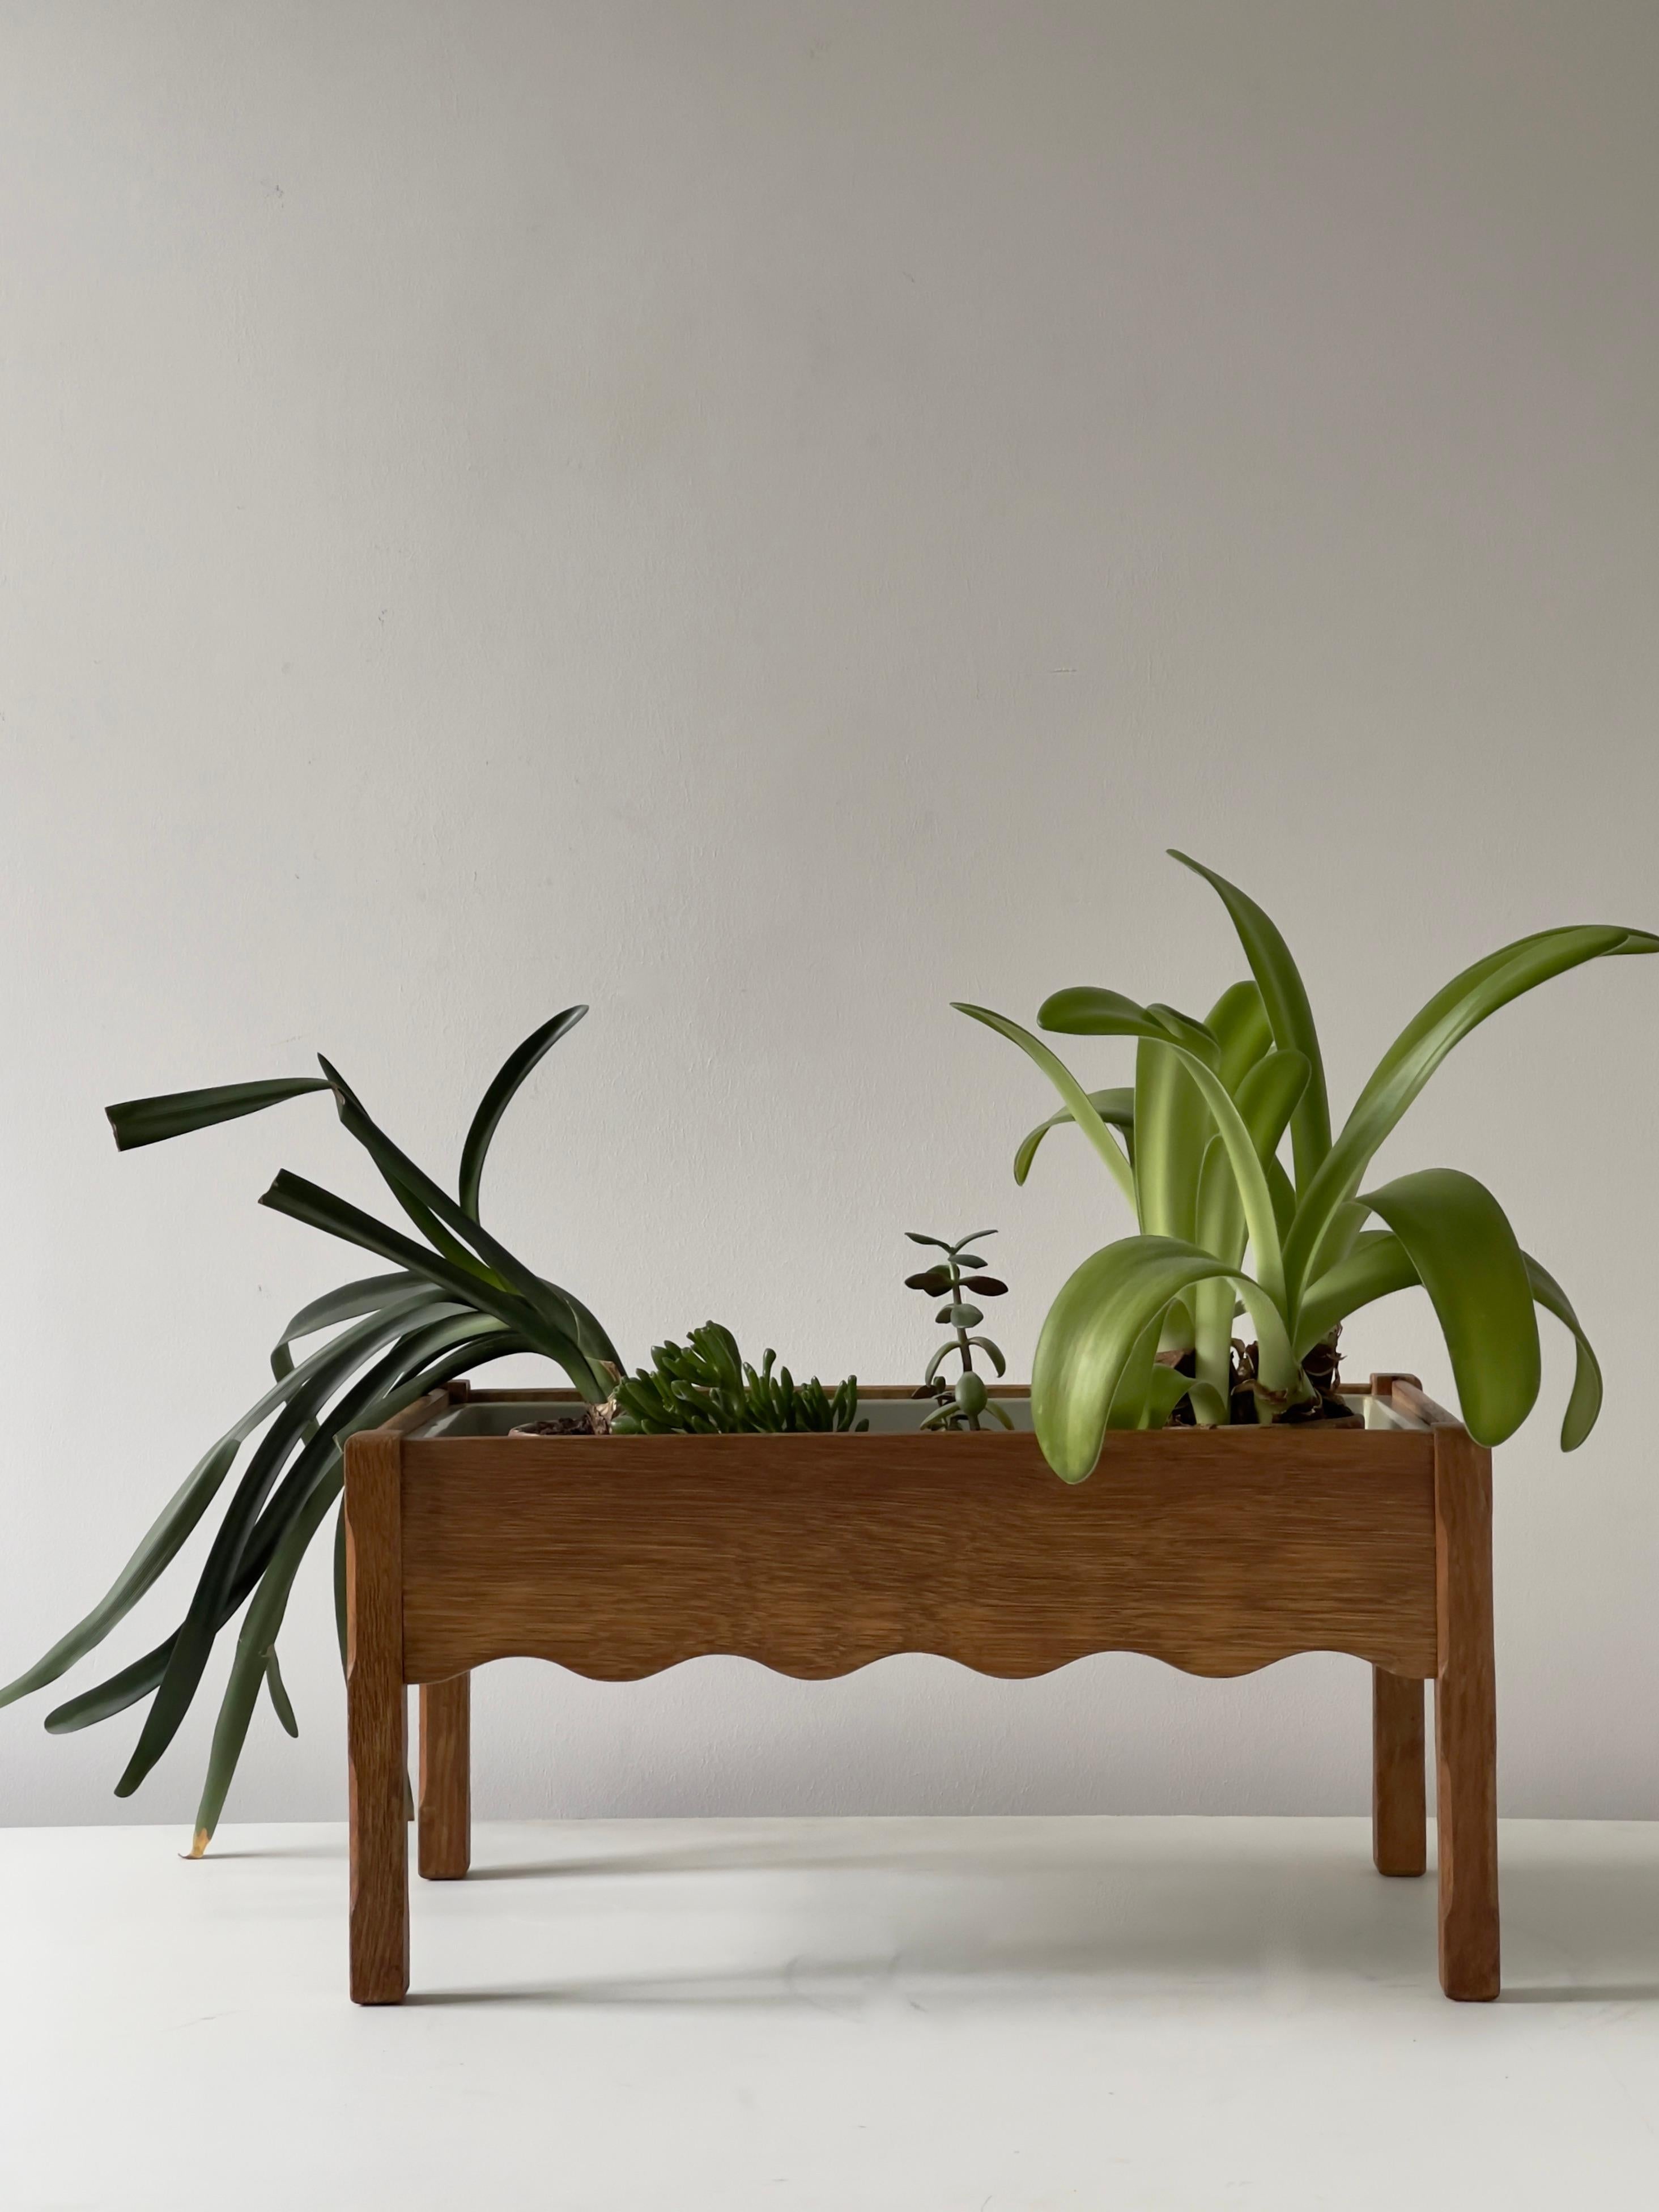 Rare 1970s danish Jardinières ( indoor planting tray ) in solid oak attributed to Henning Kjærnulf designer behind the famous razor chair EG møbler. Very good condition. Consist of a solid oak frame and a removable 10 cm high acrylic tray.